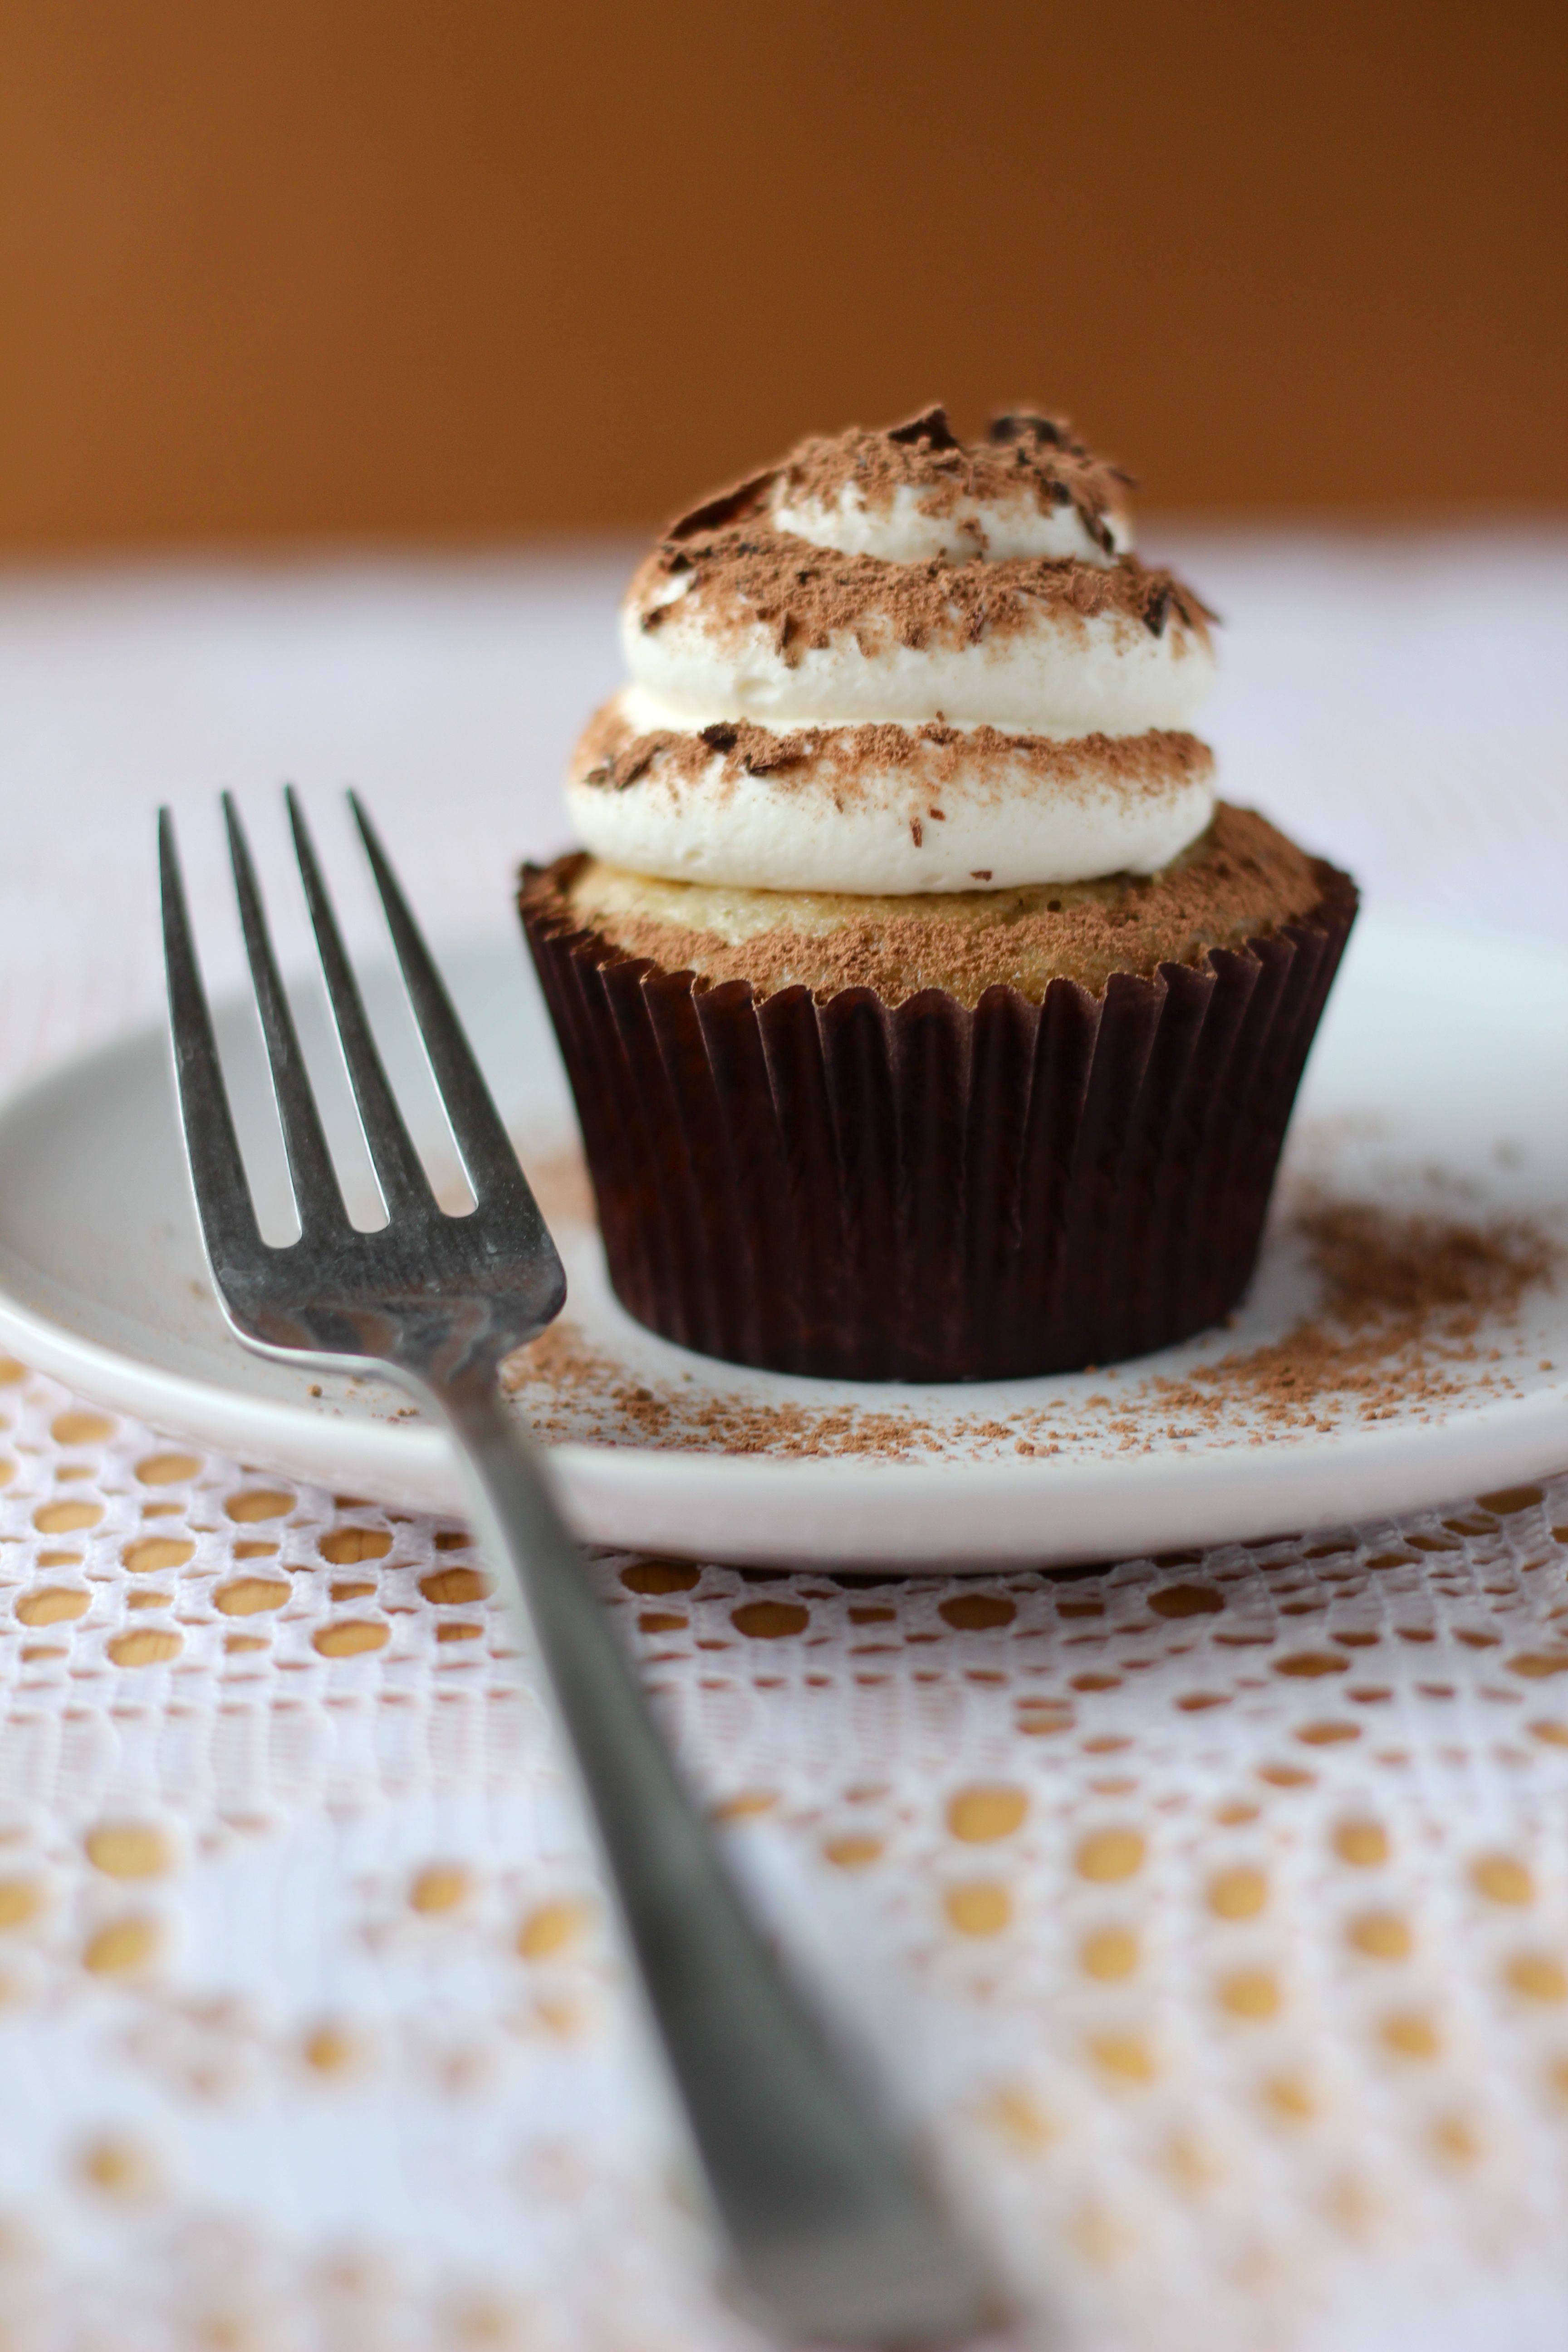 owner the  site. in crumbs cupcake to tiramisu , log launch you're this site If